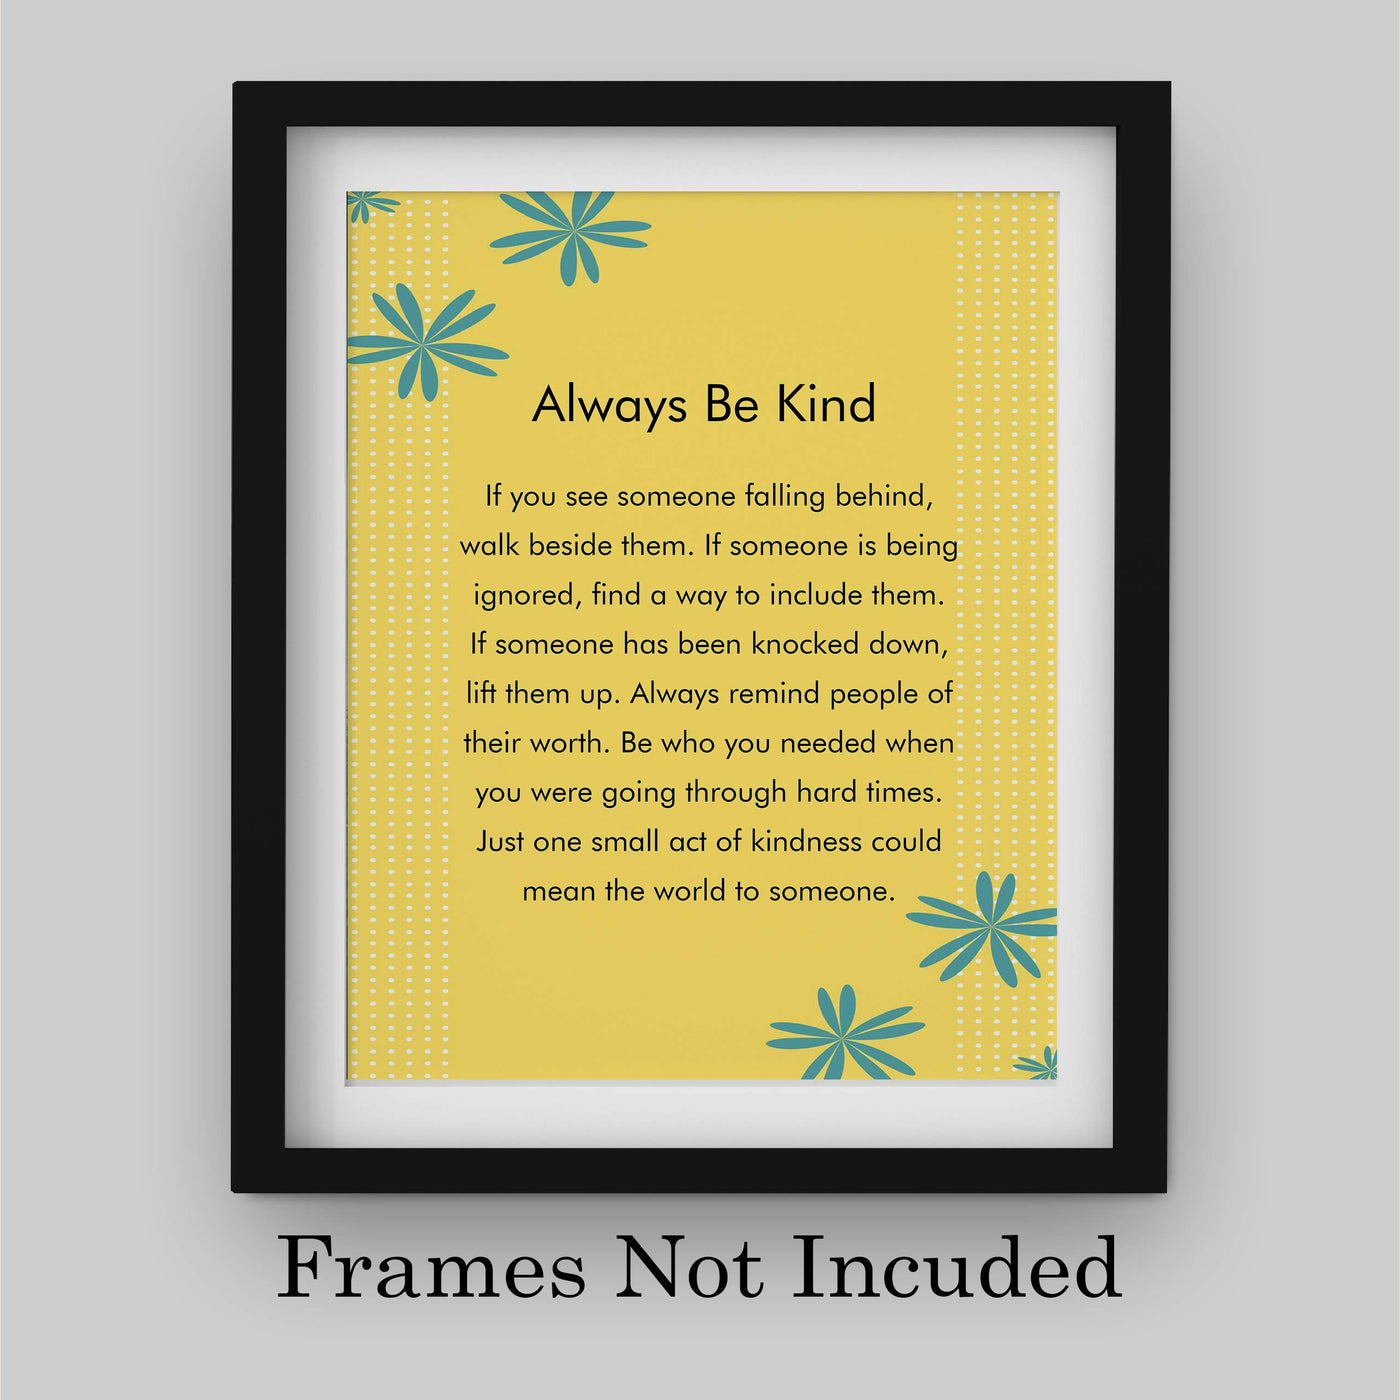 ?Always Be Kind?-Inspirational Wall Art -8 x 10" Floral Typographic Poster Print-Ready to Frame. Motivational Decor for Home-Office-School-Dorm. Great Classroom Sign! Reminder-Be Kind To Everyone!